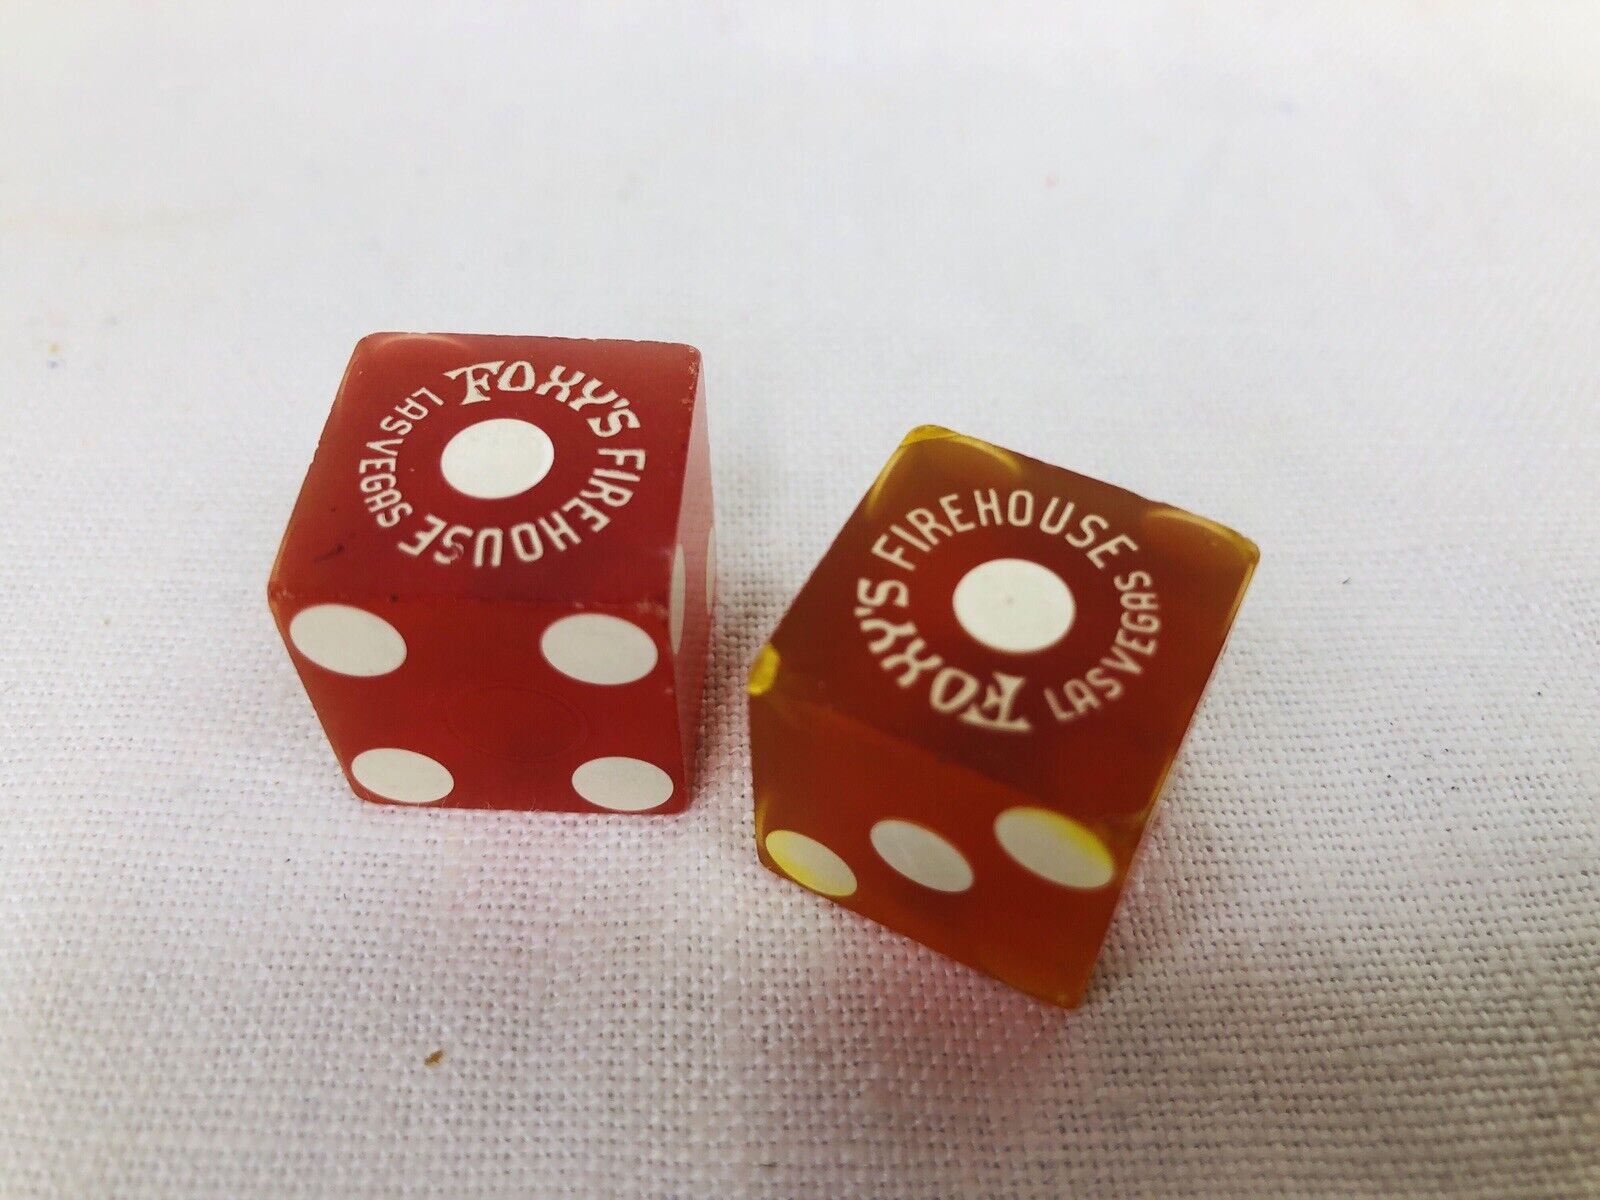 Vintage Dice Oversized Red Foxy's Firehouse Las Vegas Casino Dice 3/4 In Square